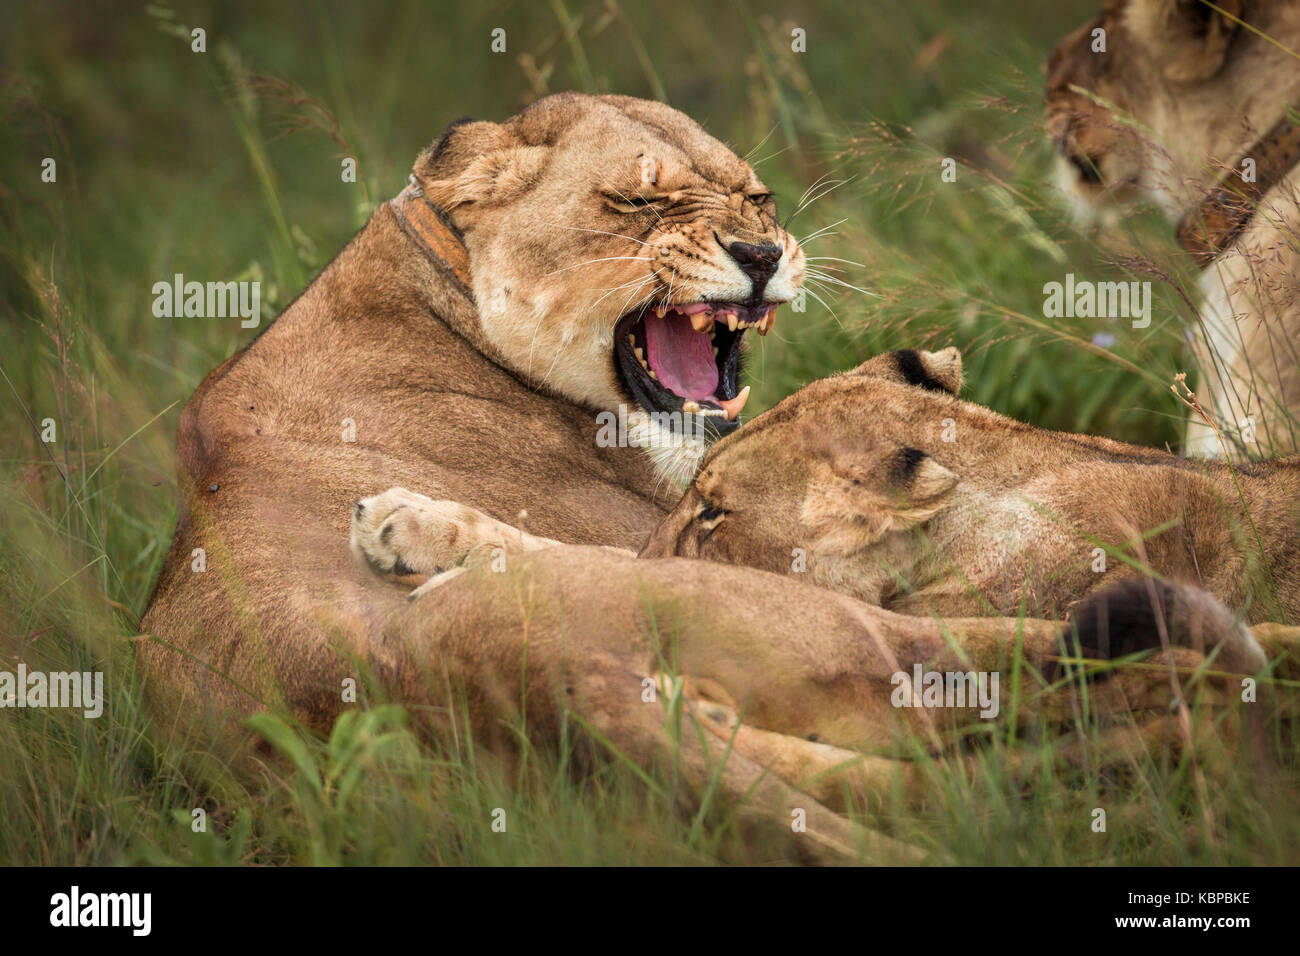 lioness growling at her cub that is trying to nurse Stock Photo